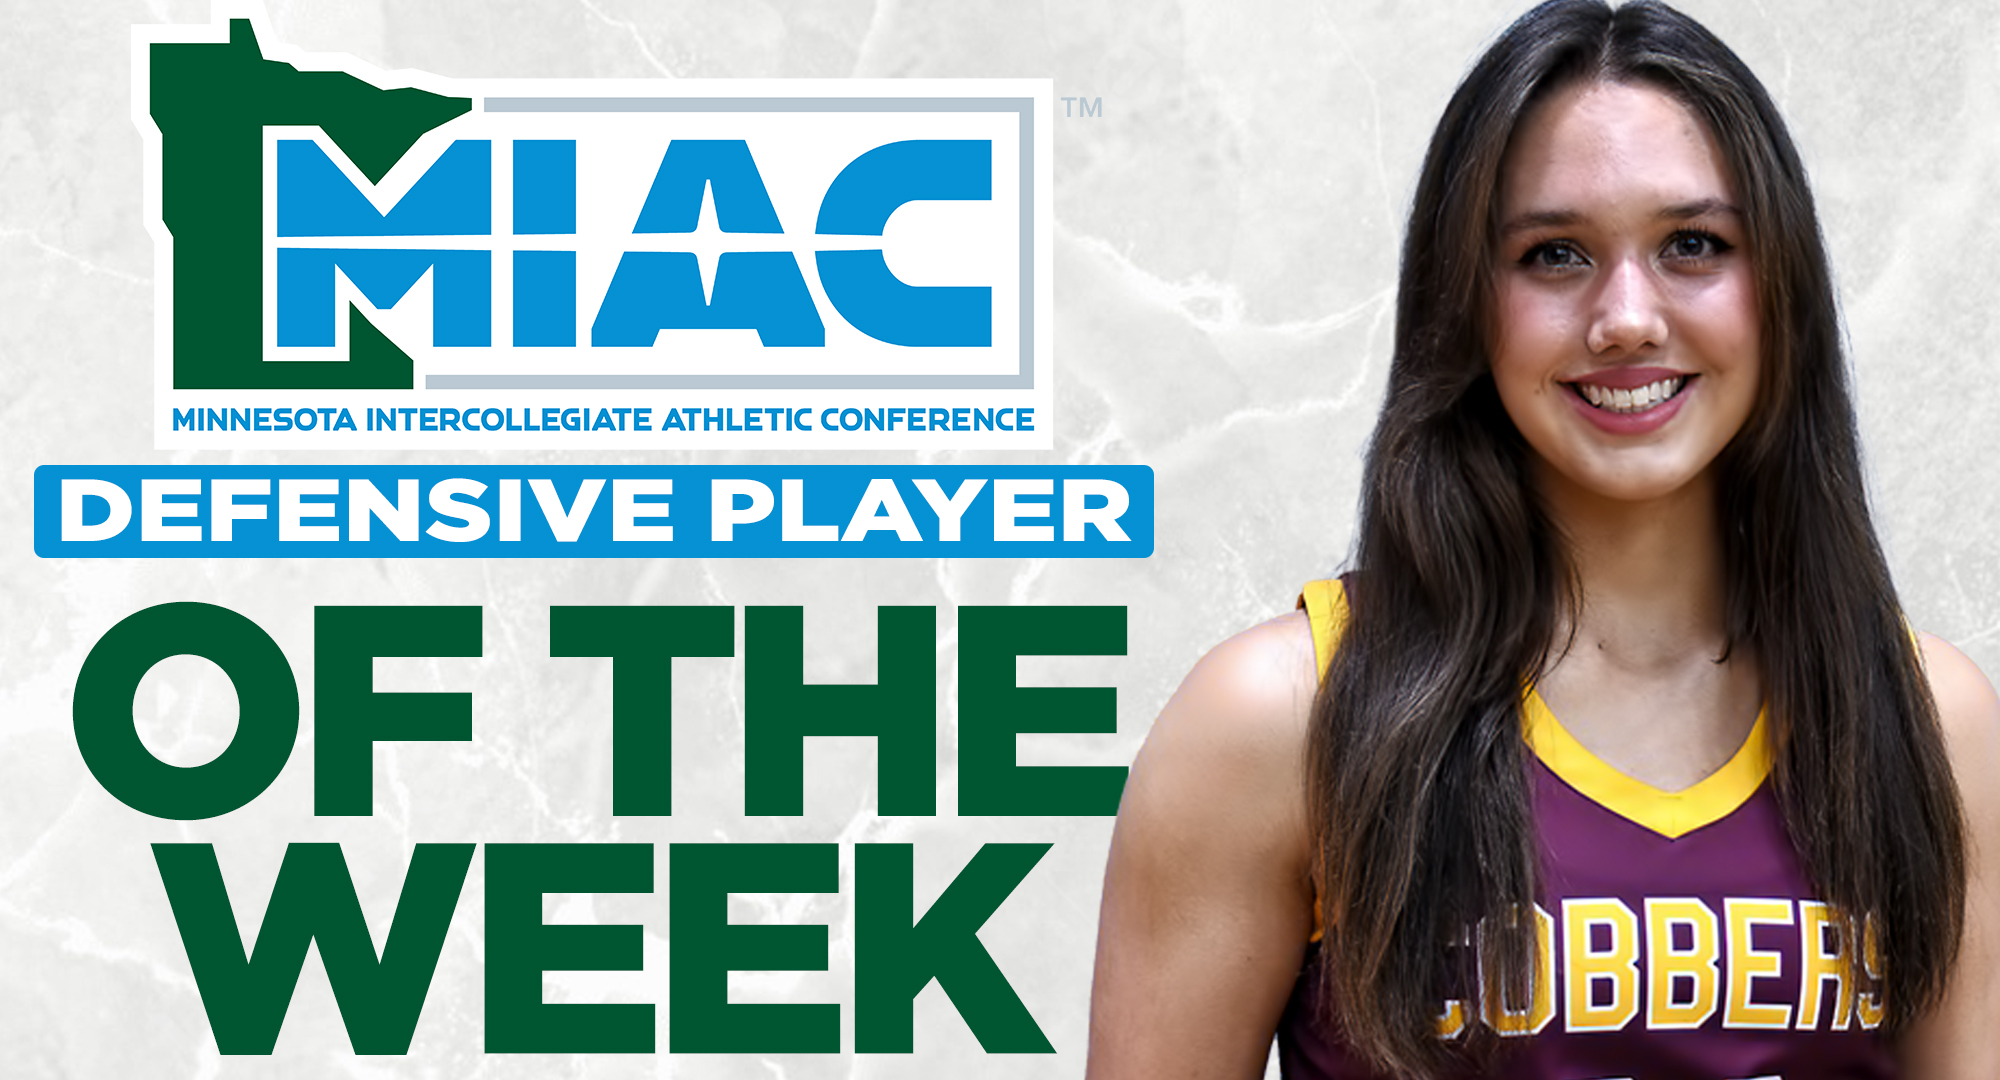 Junior Makayla Anderson was named the MIAC Defensive Player of the Week after scoring points and grabbing 12 rebounds against St. Mary's.